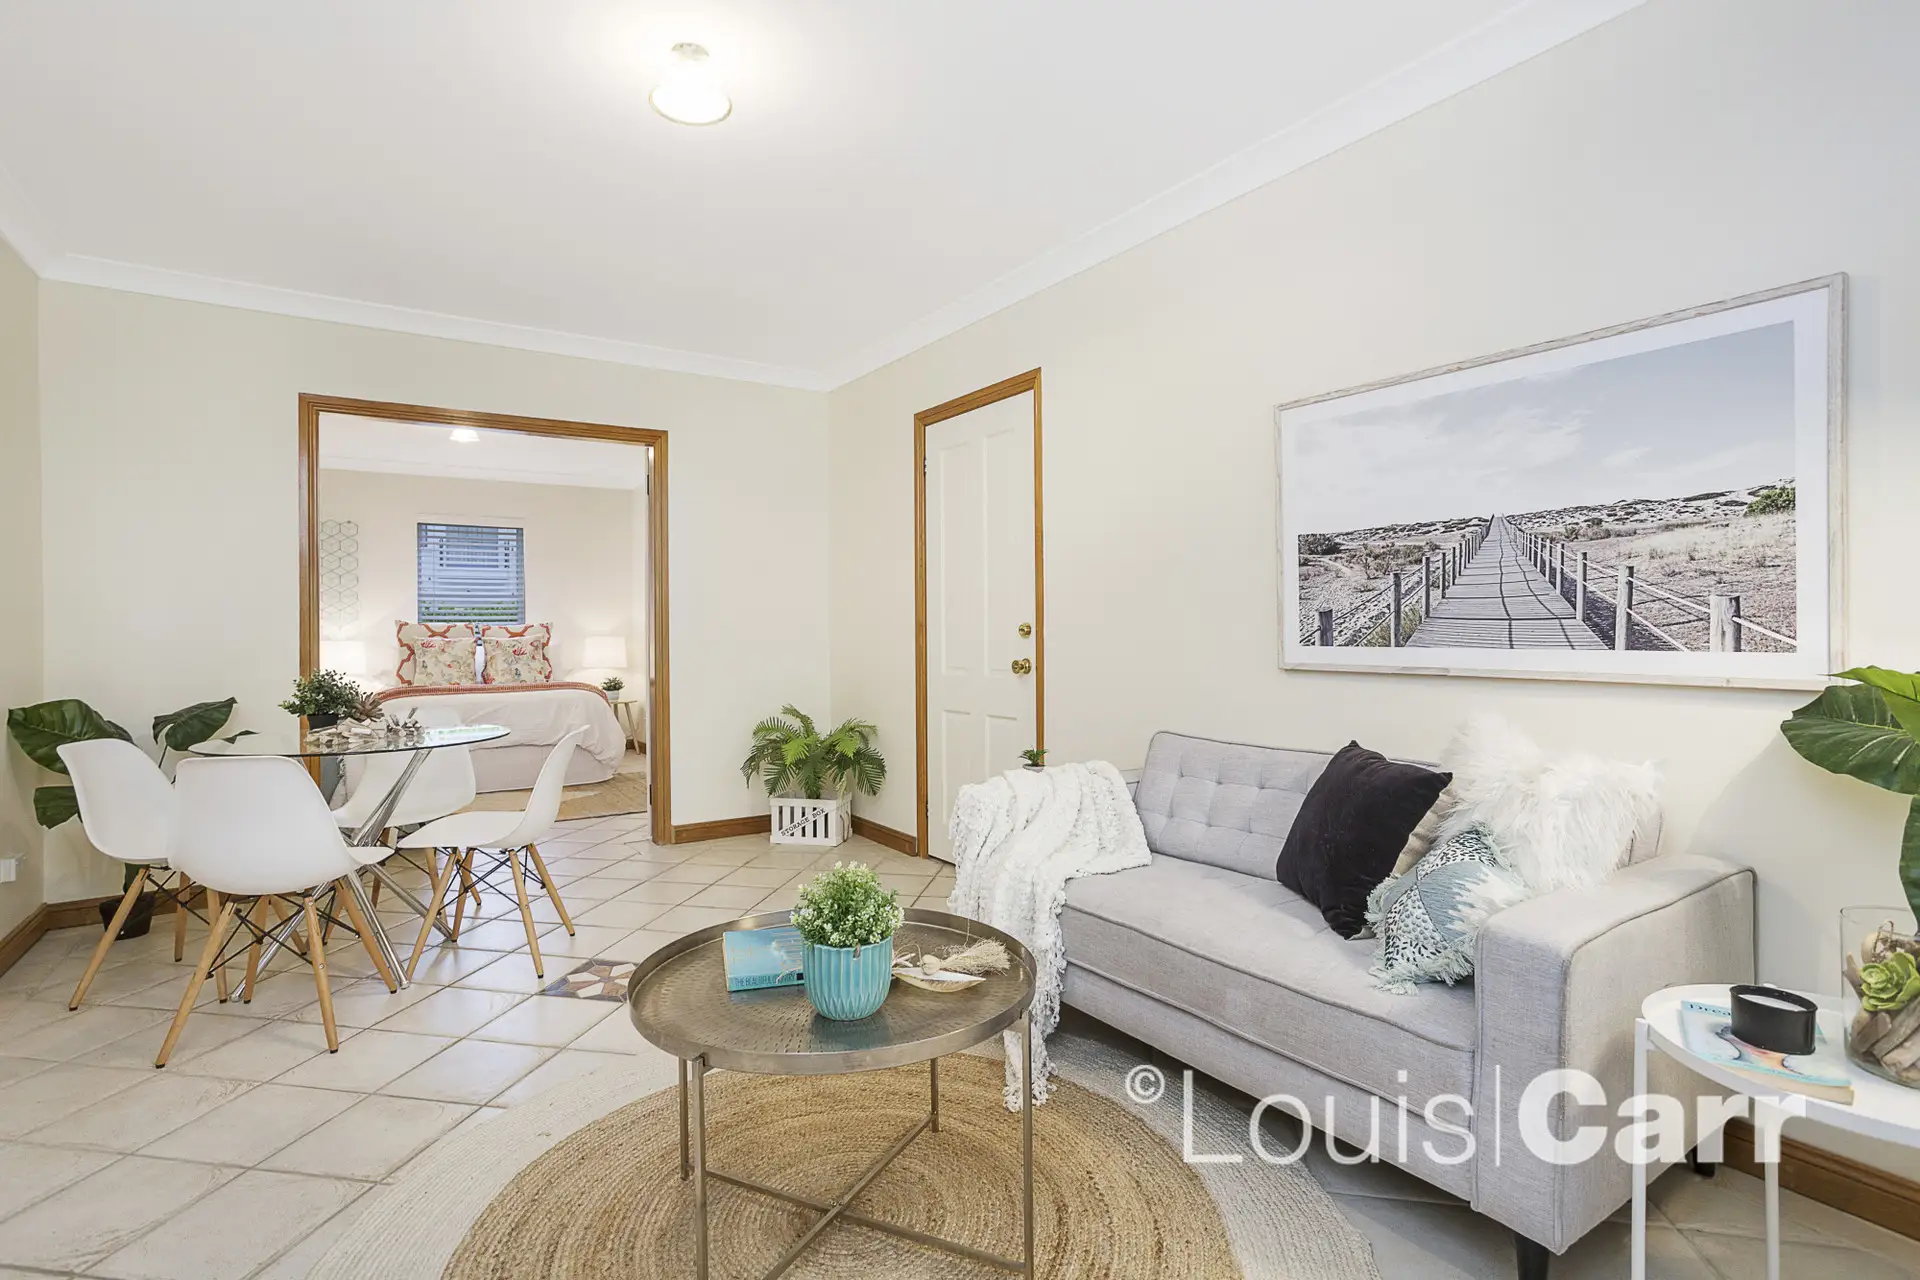 2 Francis Oakes Way, West Pennant Hills Sold by Louis Carr Real Estate - image 2